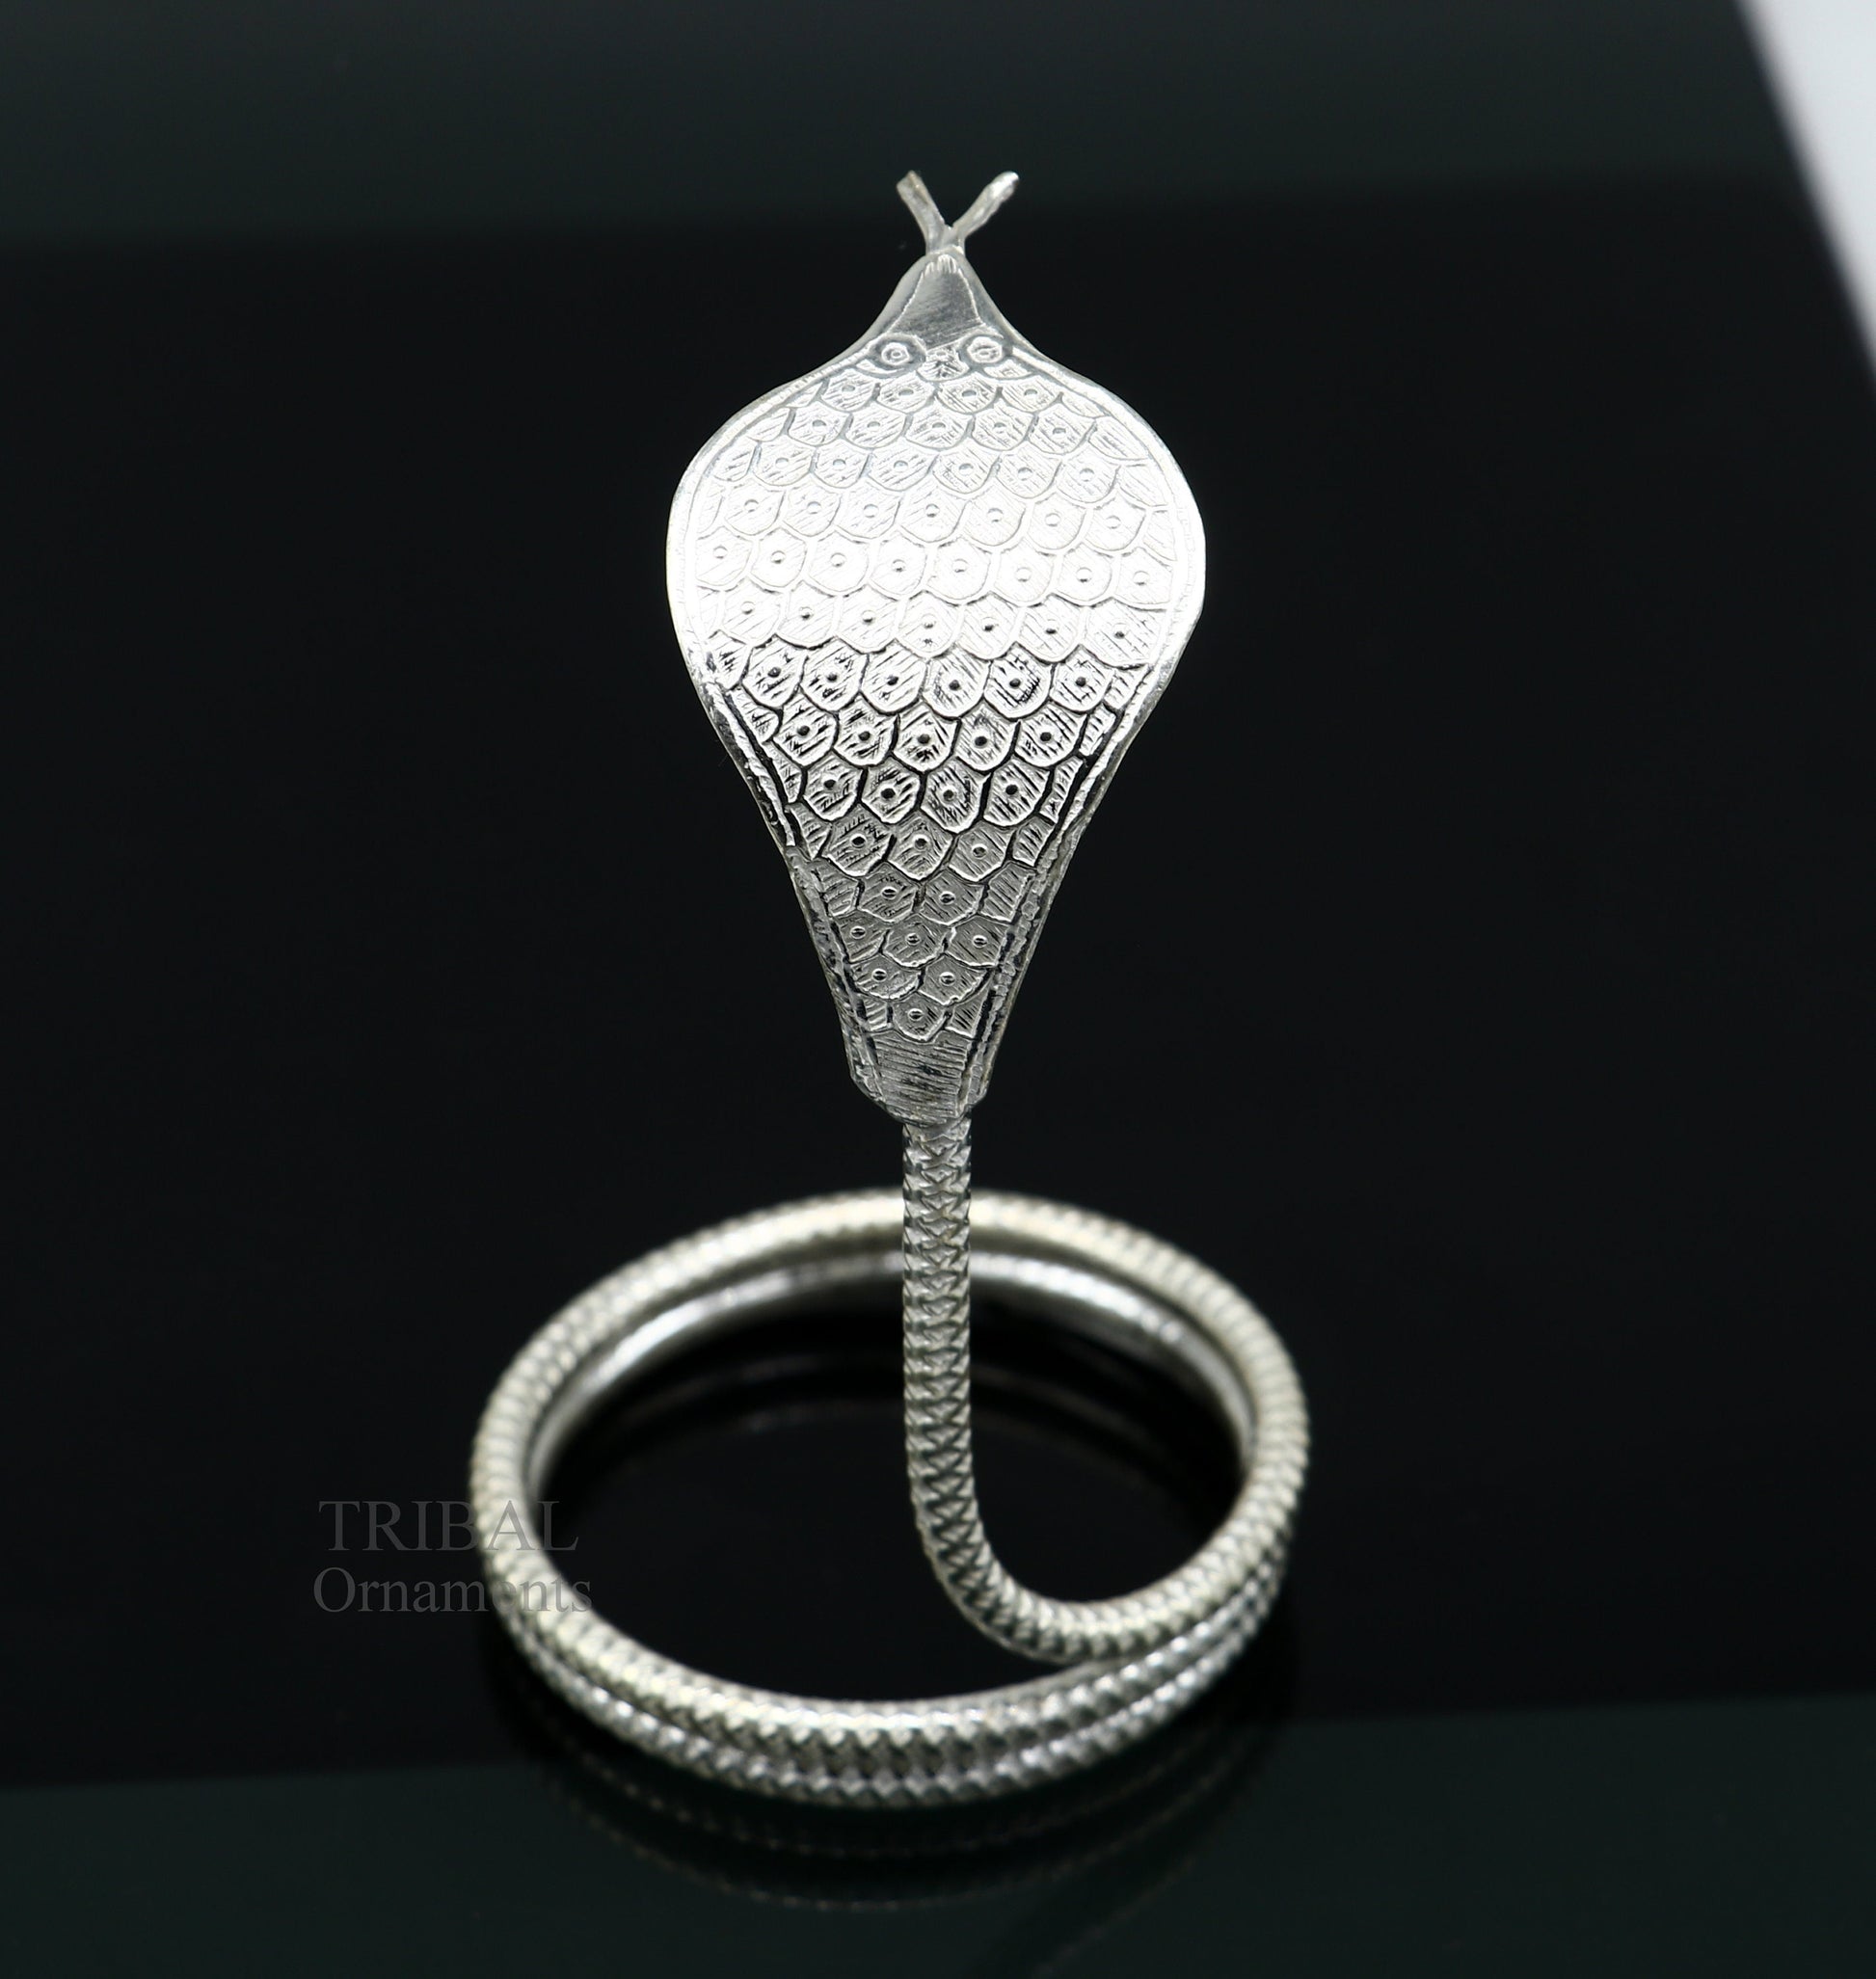 Sterling silver handmade fabulous vintage antique mini snake or shiva snake for puja or worshipping, solid Diwali puja article su671 - TRIBAL ORNAMENTS